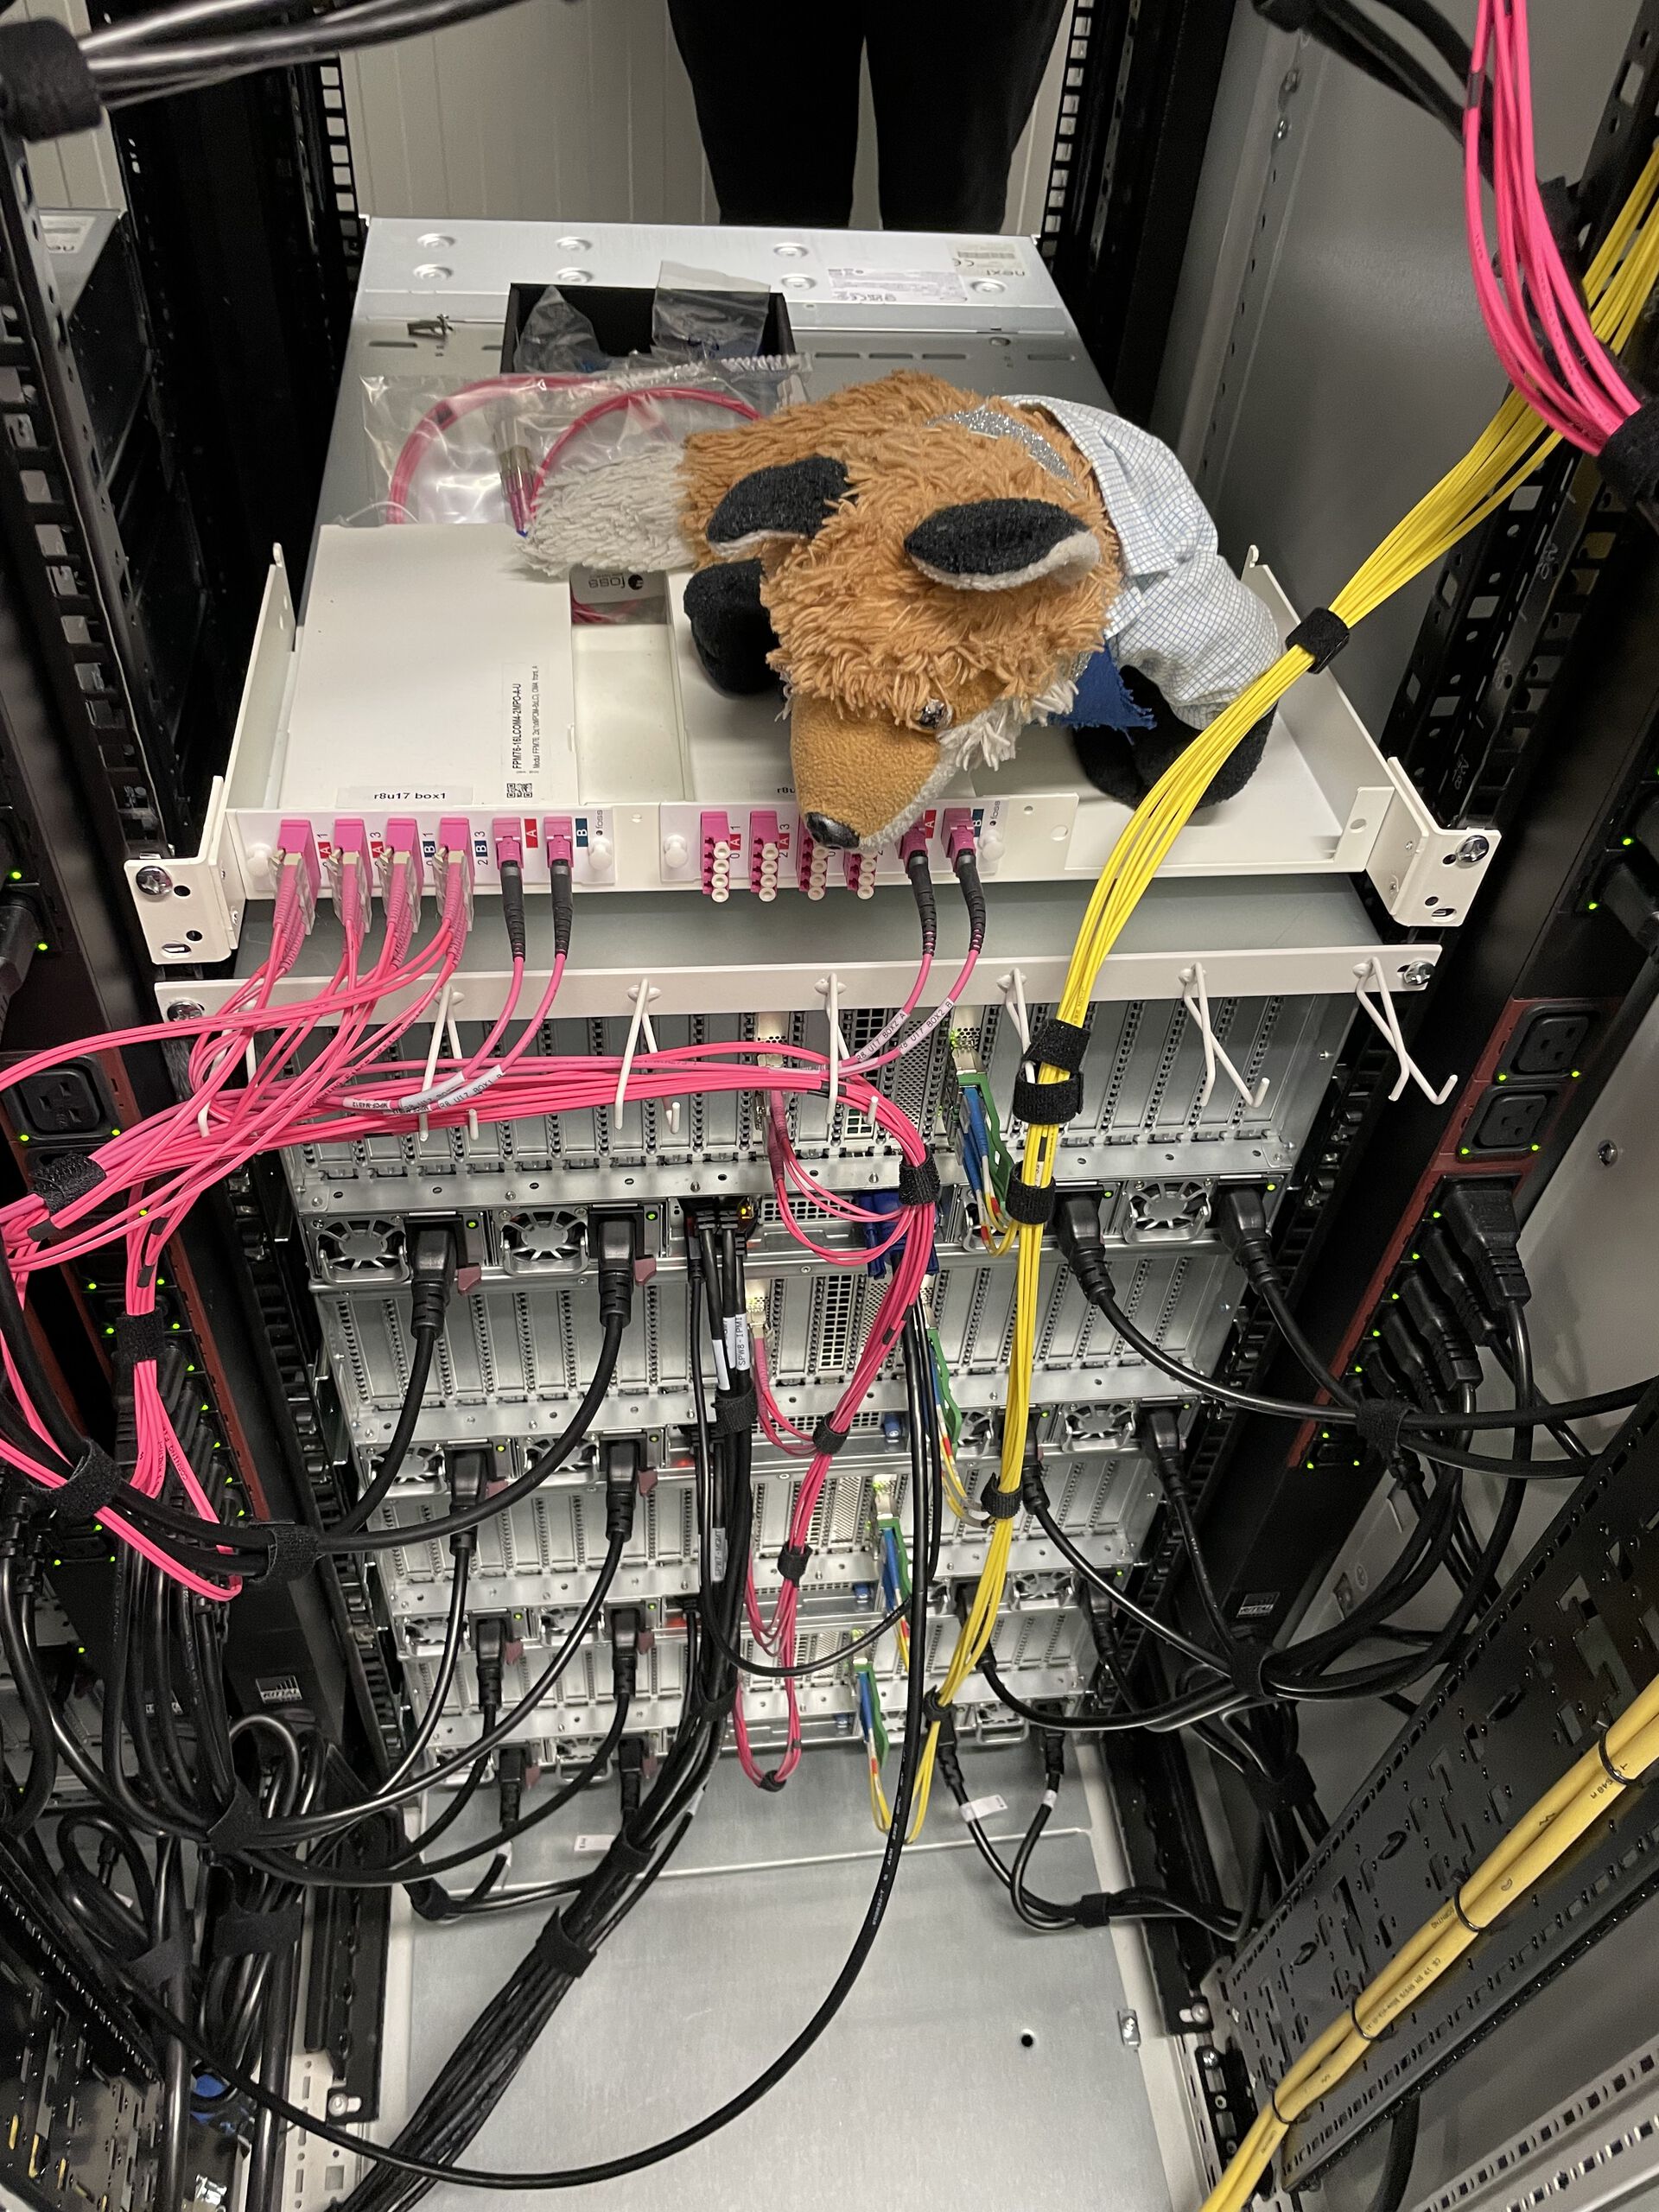 Fox inspecting computer cabling